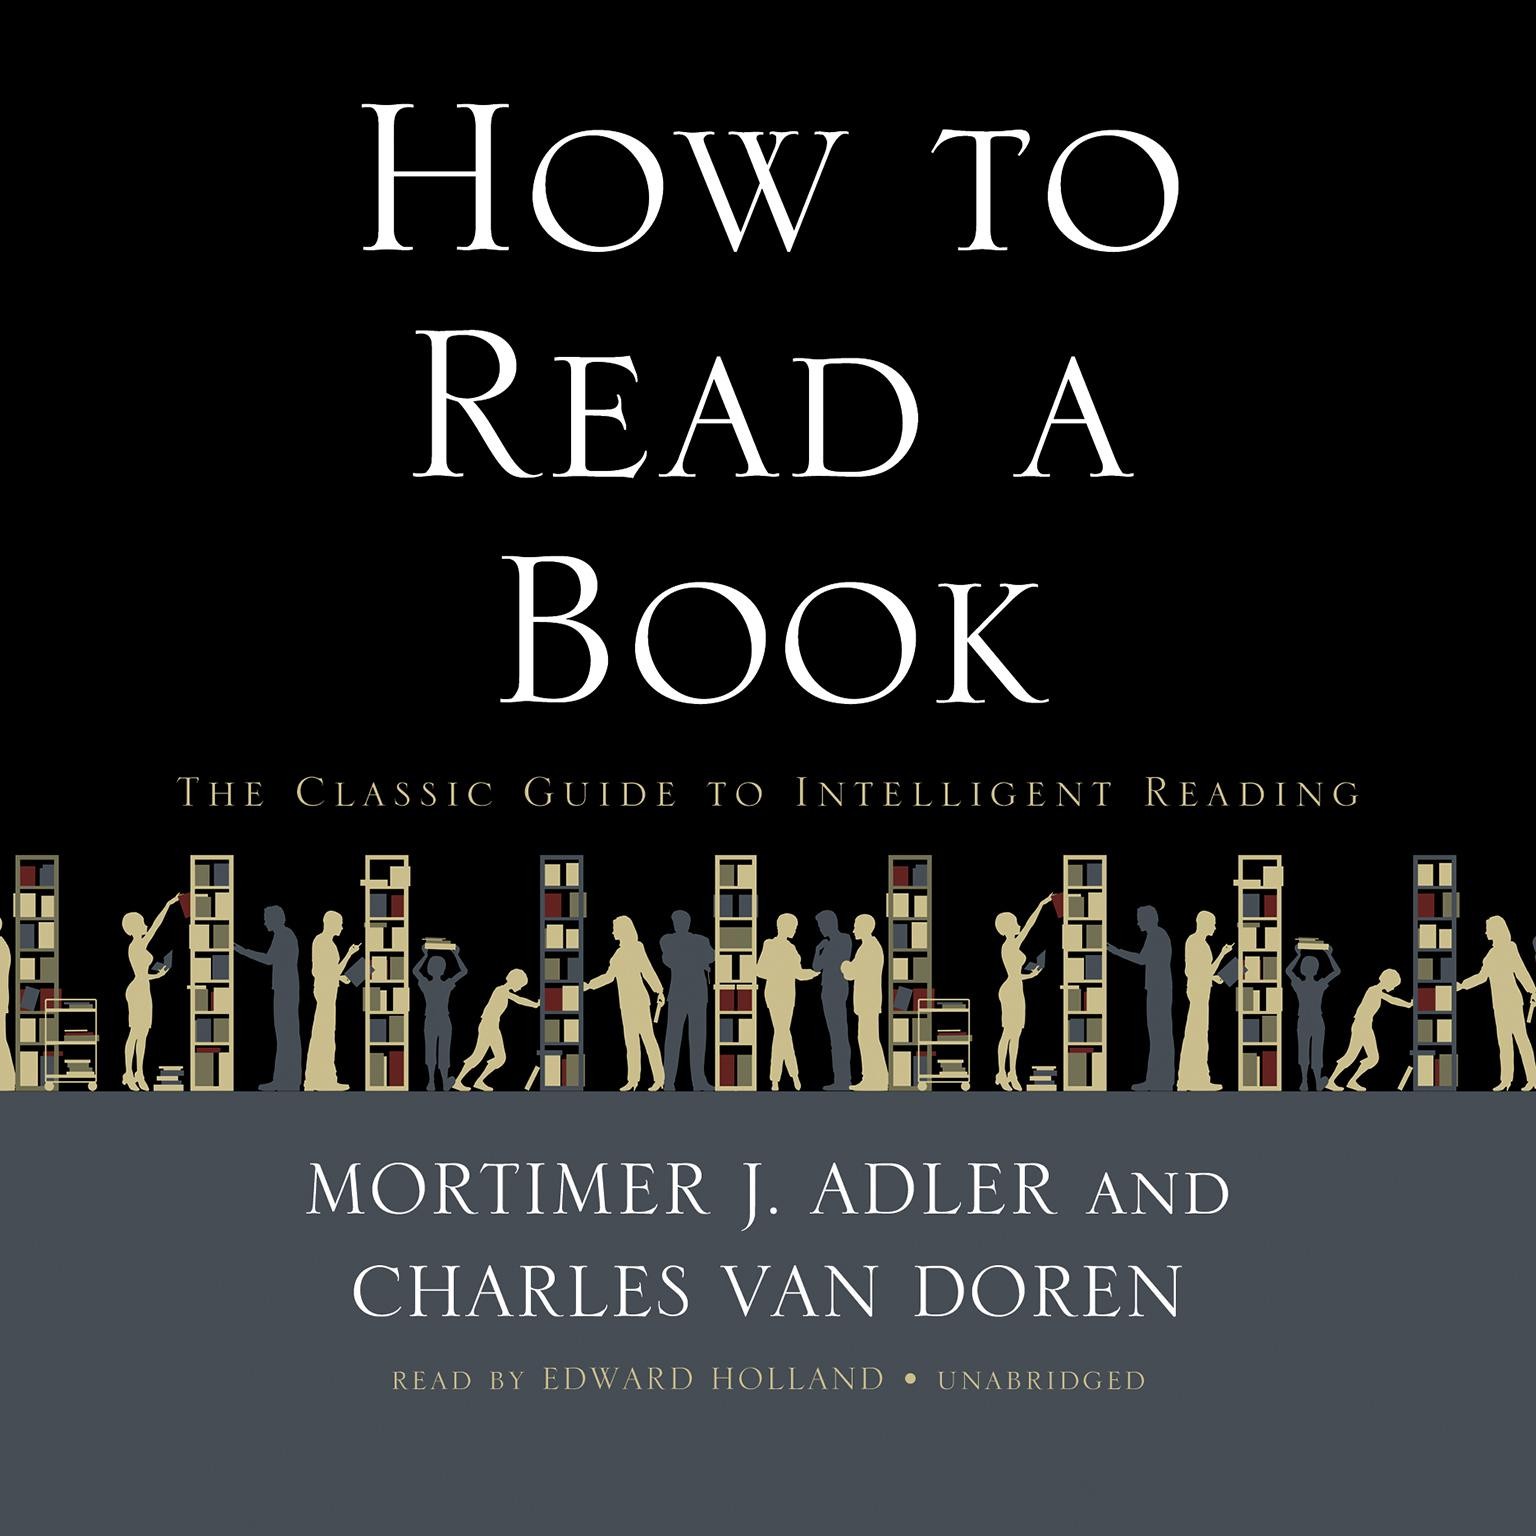 How To Read A Book- A Classic Guide to Intelligent Reading